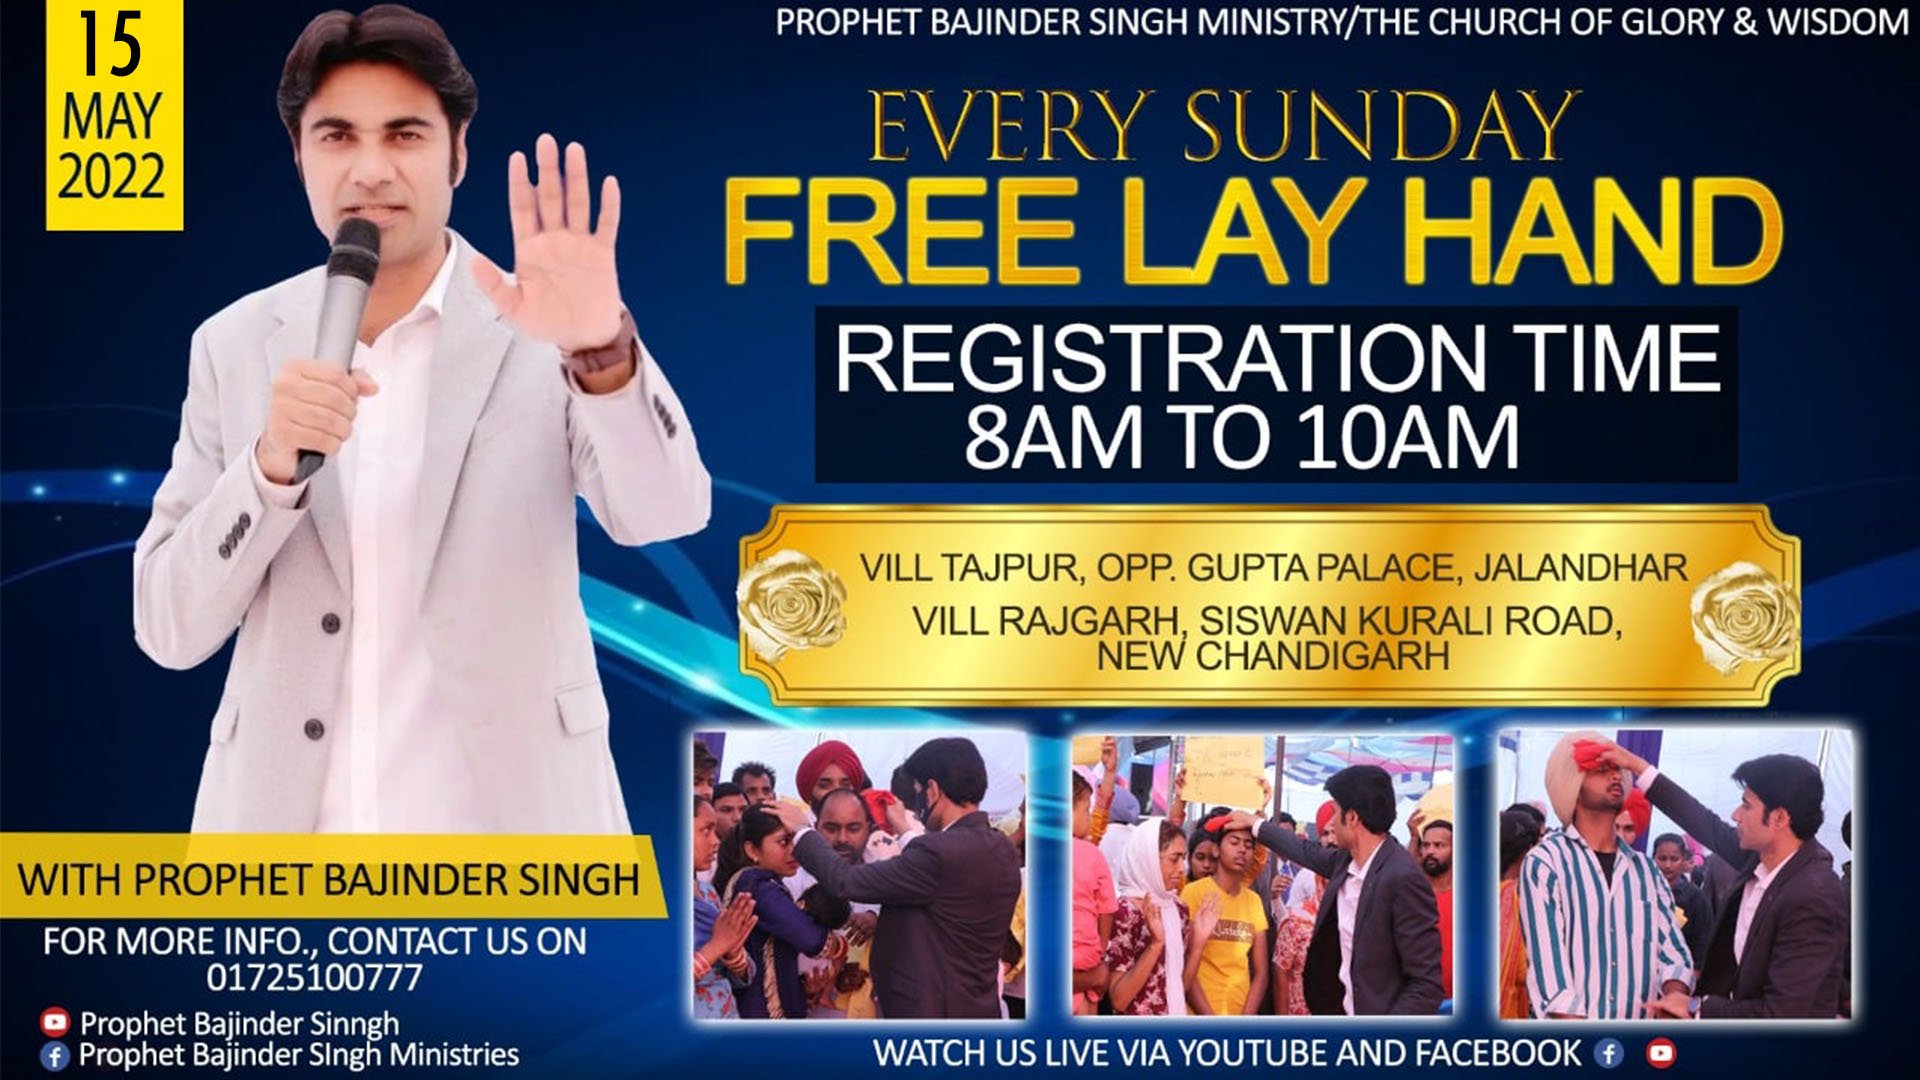 free-lay-hand-prayer-will-be-done-for-everyone-prophet-bajinder-singh